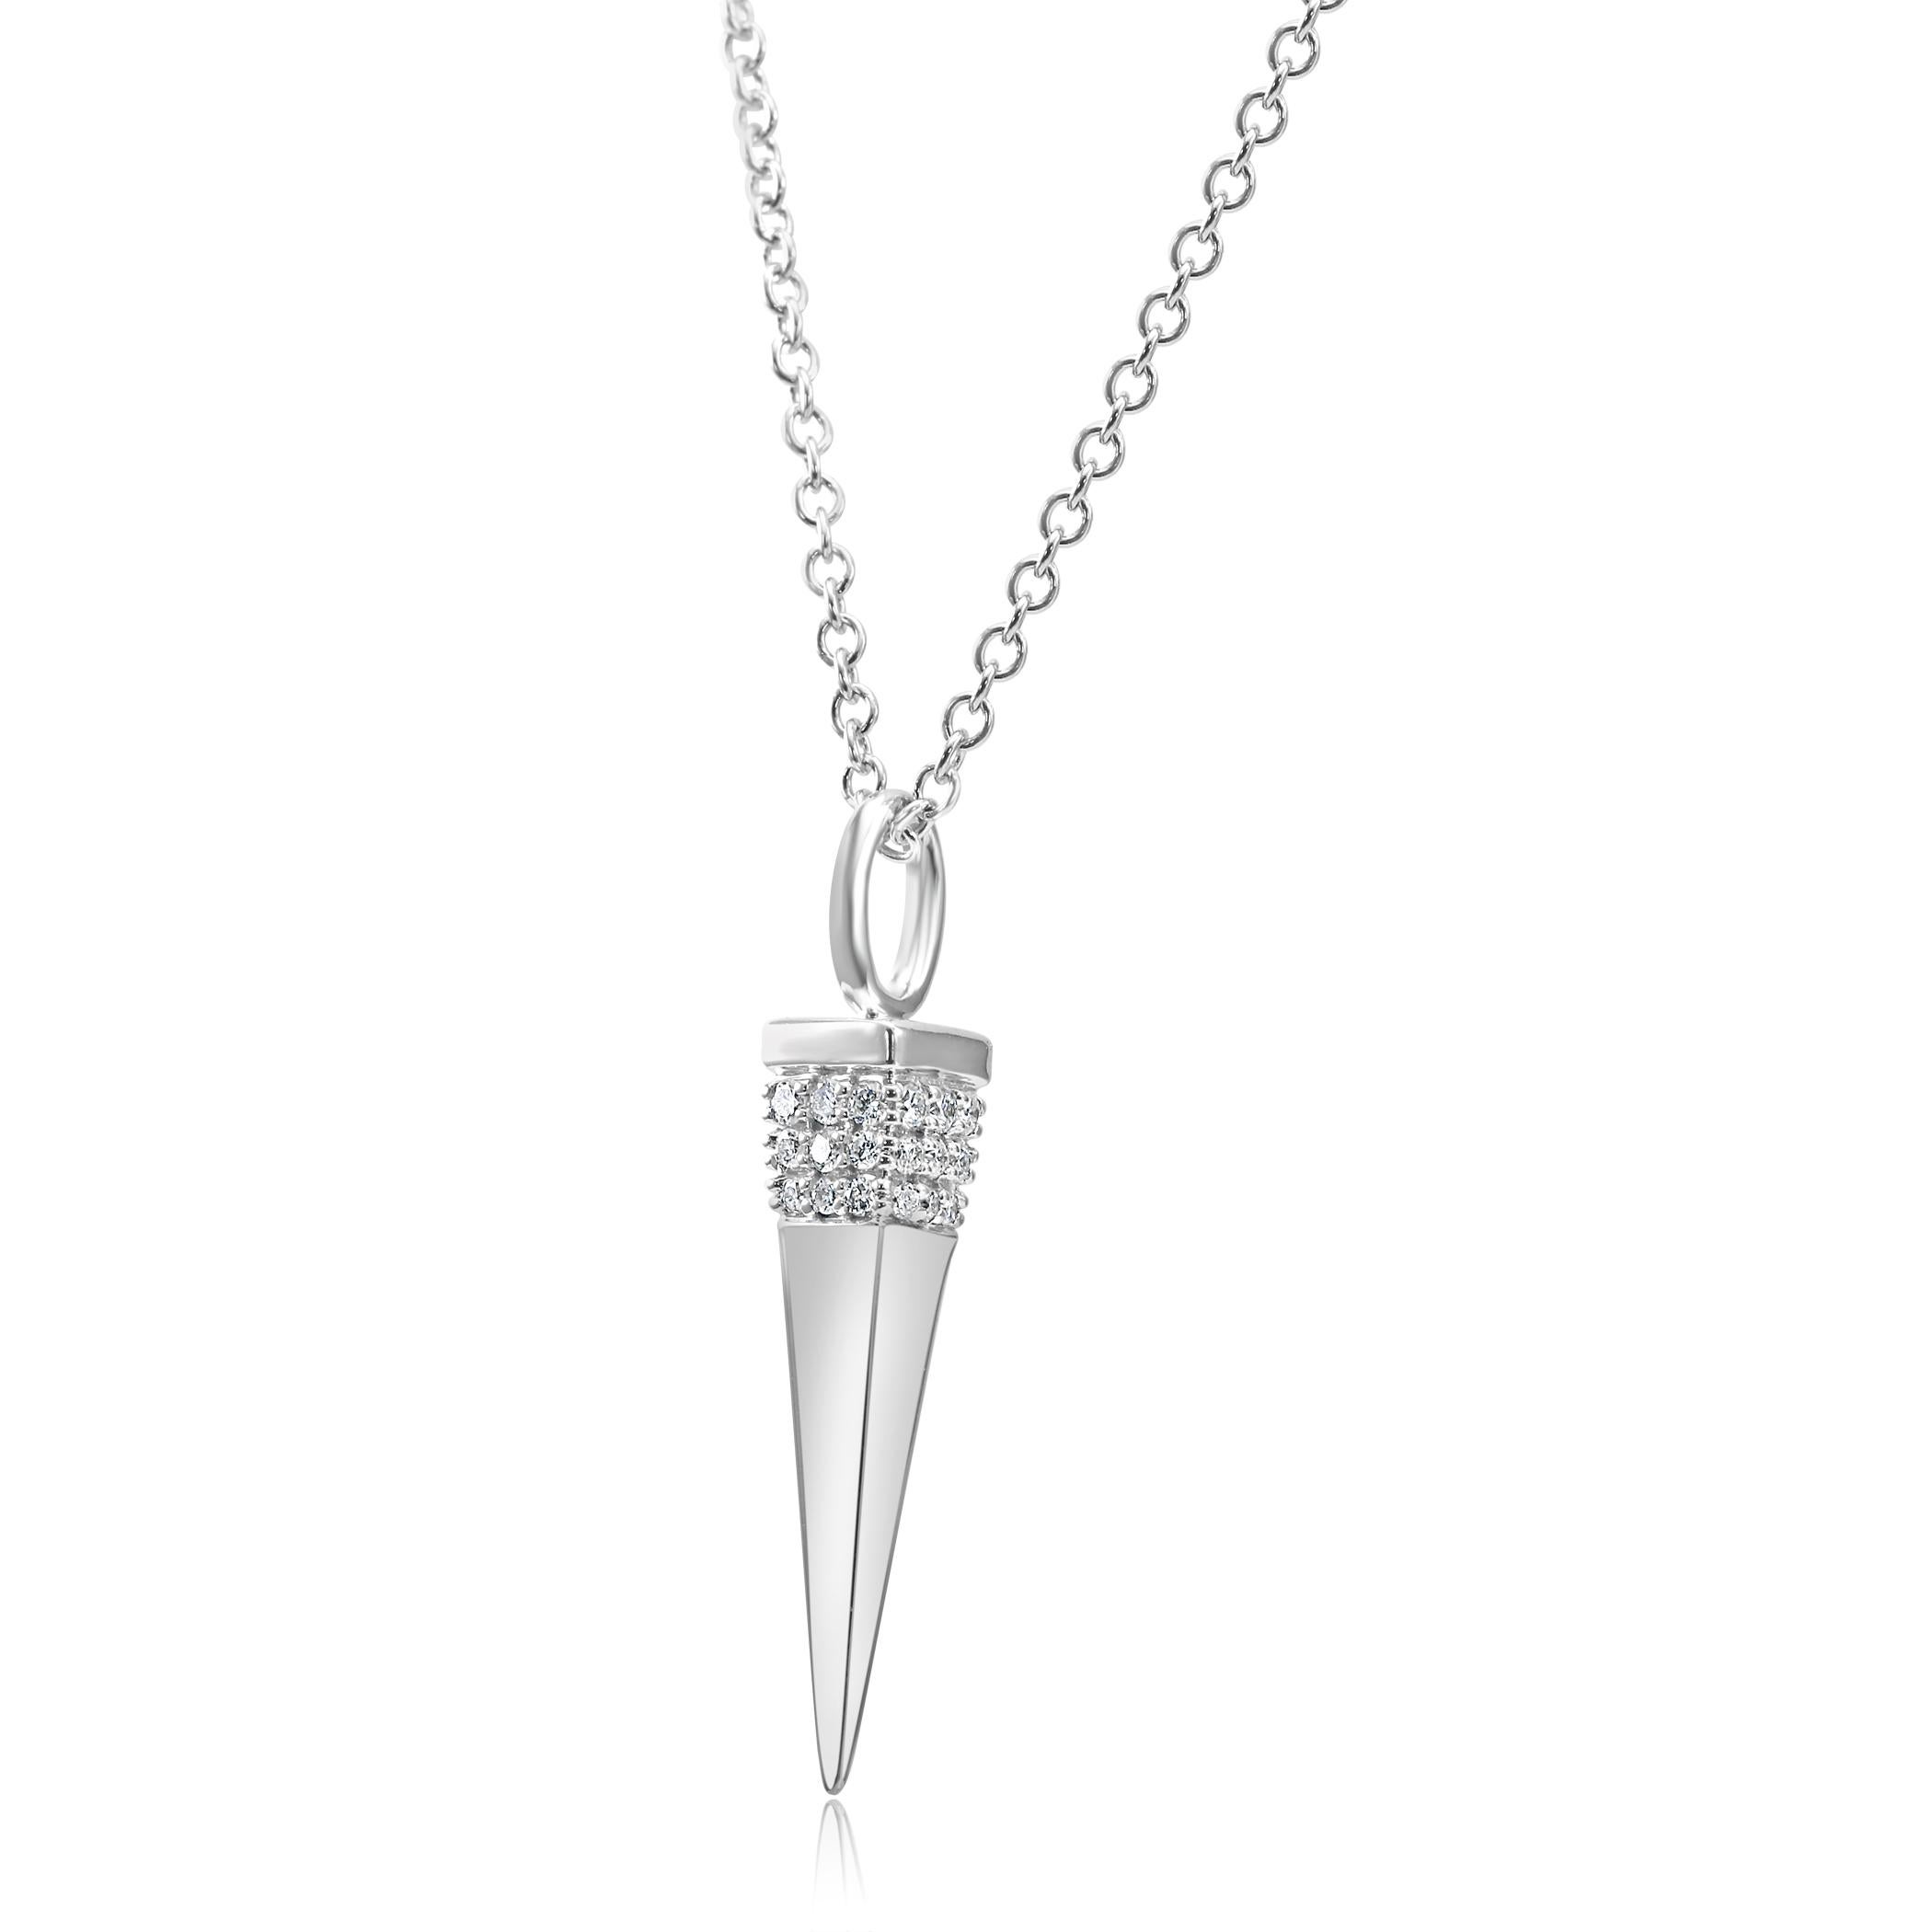 36 White Colorless SI Clarity Diamond Rounds 0.16 Carat Set in Stylish everyday wear 14K White Gold Dangle Drop Pendant Chain Necklace. Can be worn as 18 inches or 16 inches. 

Total Diamond Weight 0.16 Carat

Style available in all gold colors and